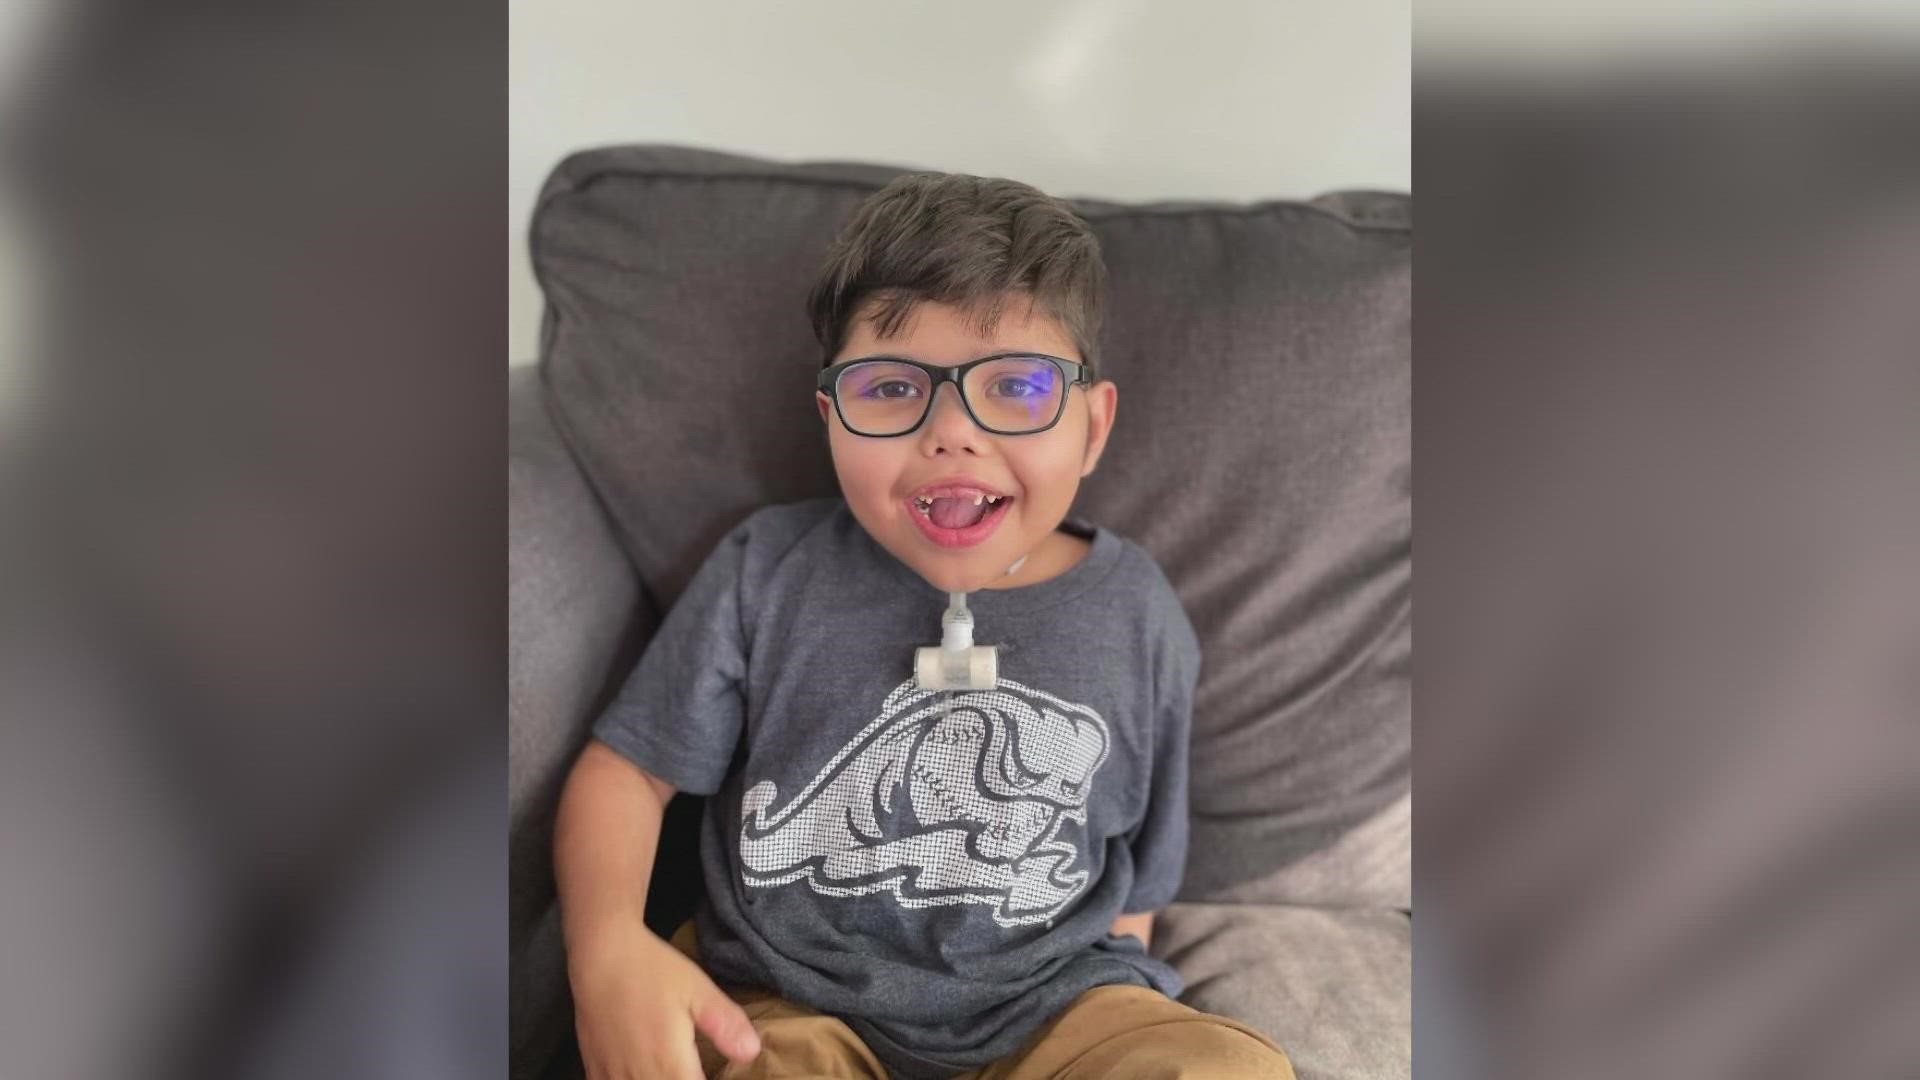 Alicia Moreno is looking for a kidney transplant for her five-year-old son Anderson, who's been on dialysis since 2017.